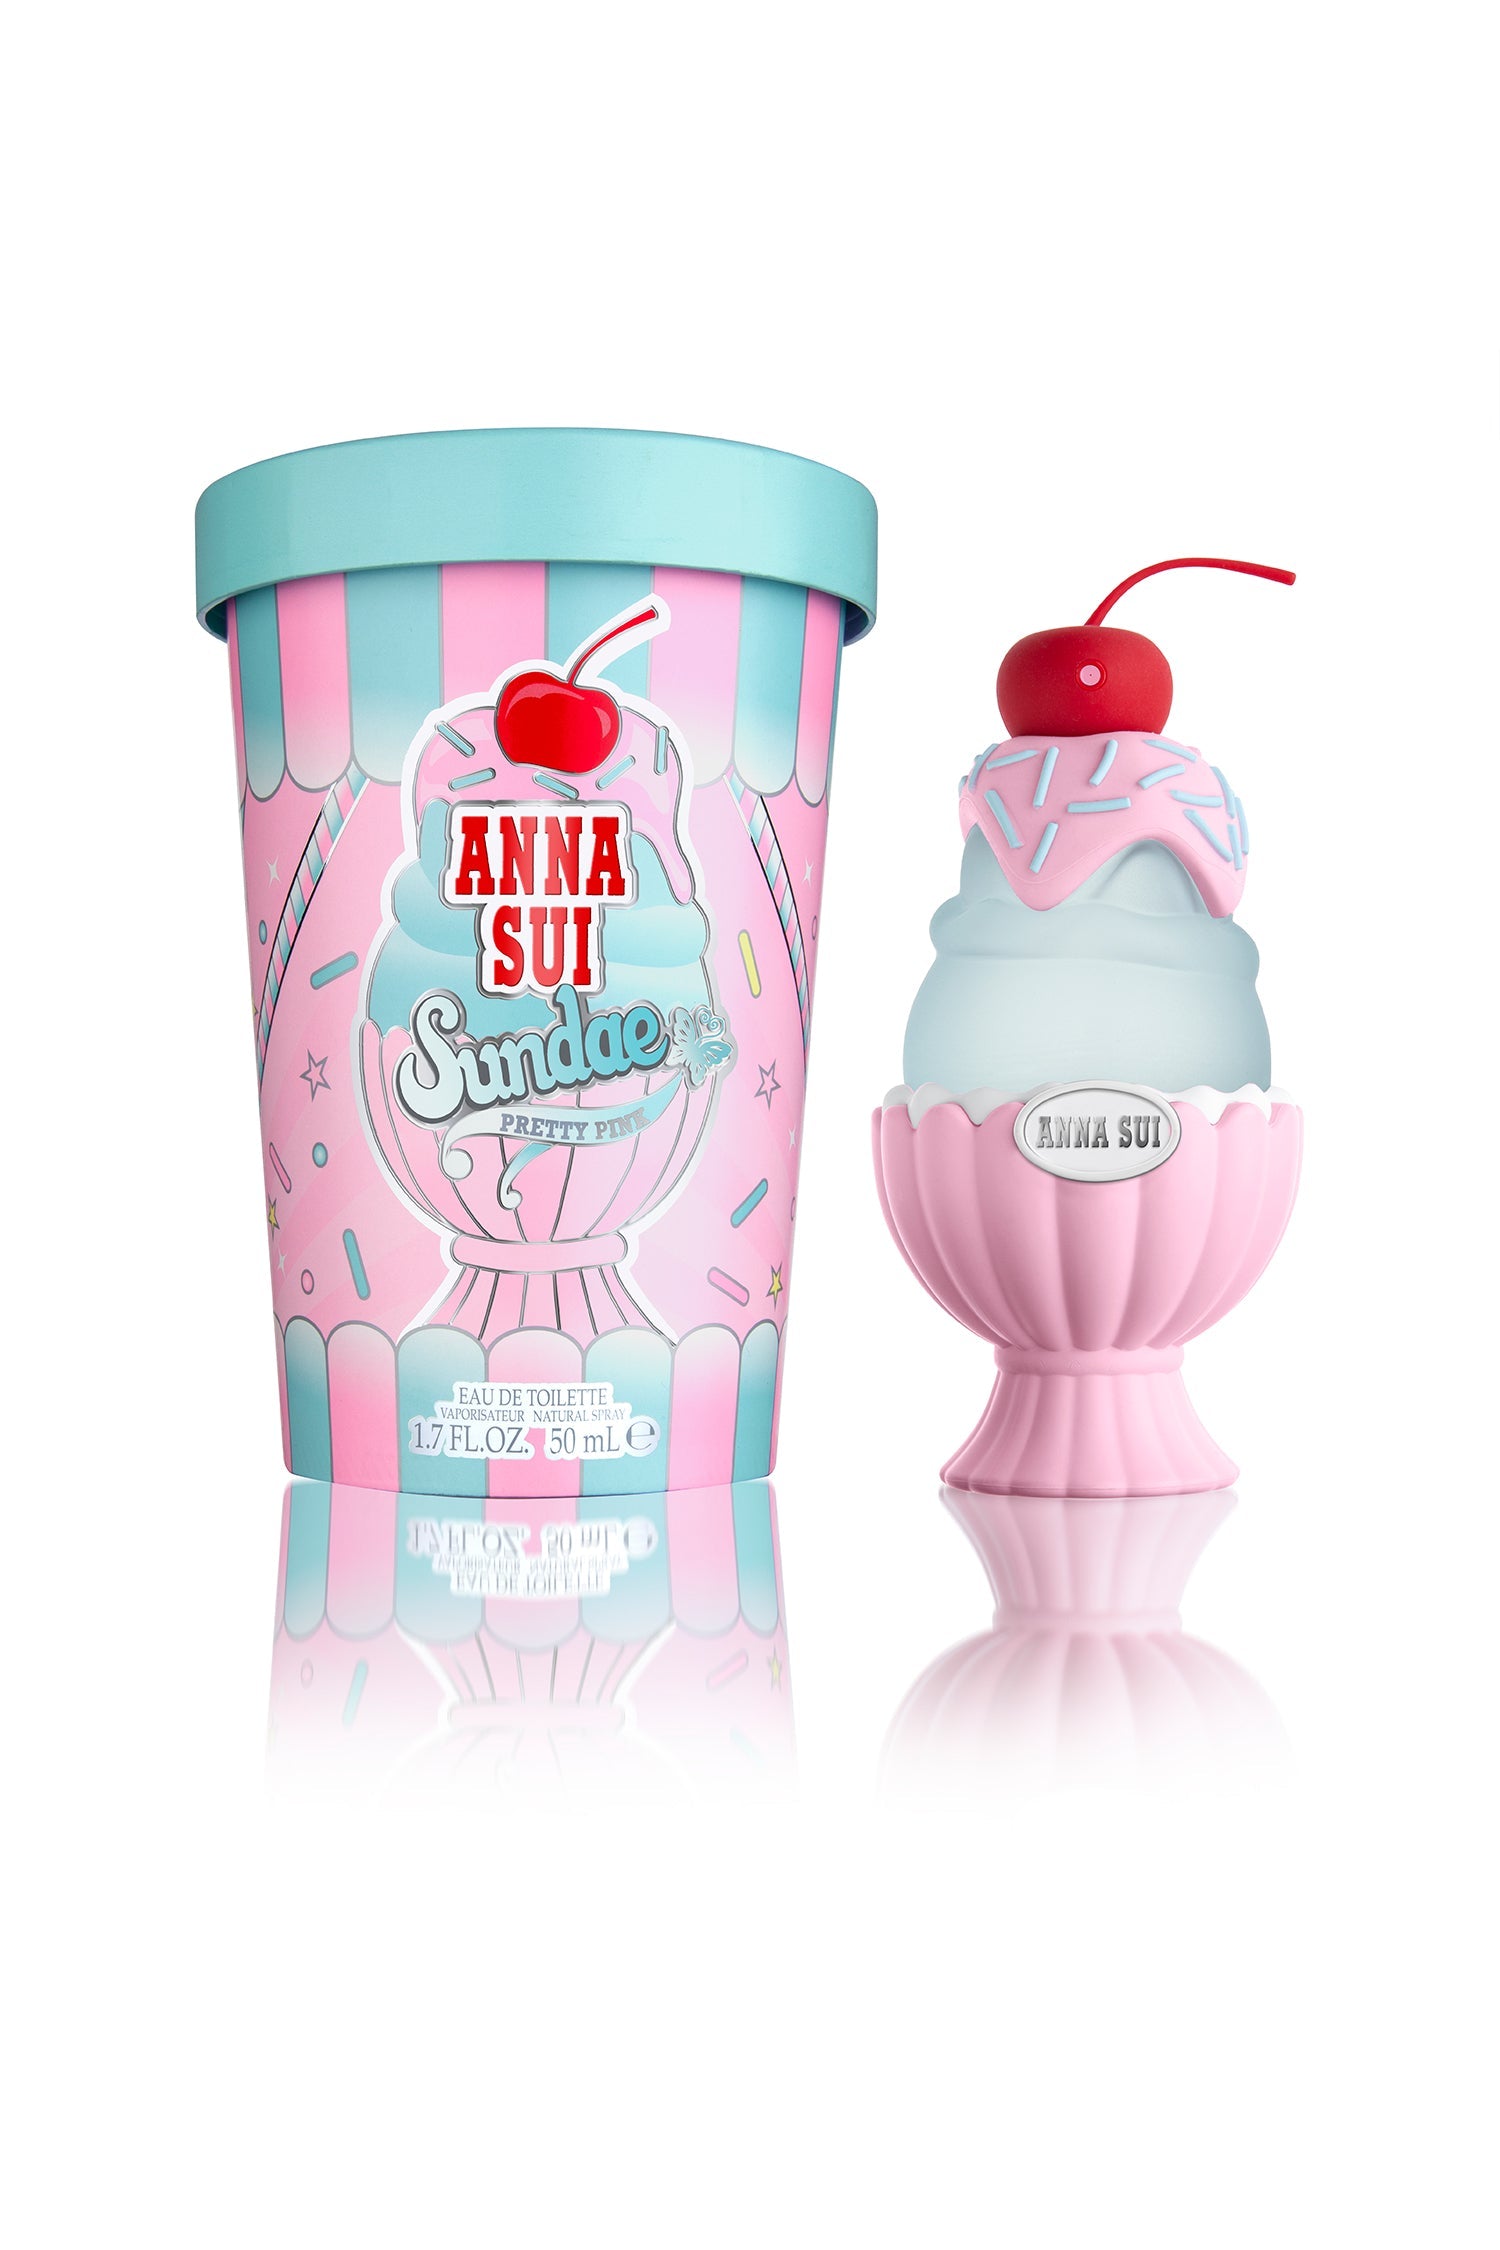 Eau de toilette Set for girly girls in an ice cream sundae bottle with a cherry sprayer, in a pink box